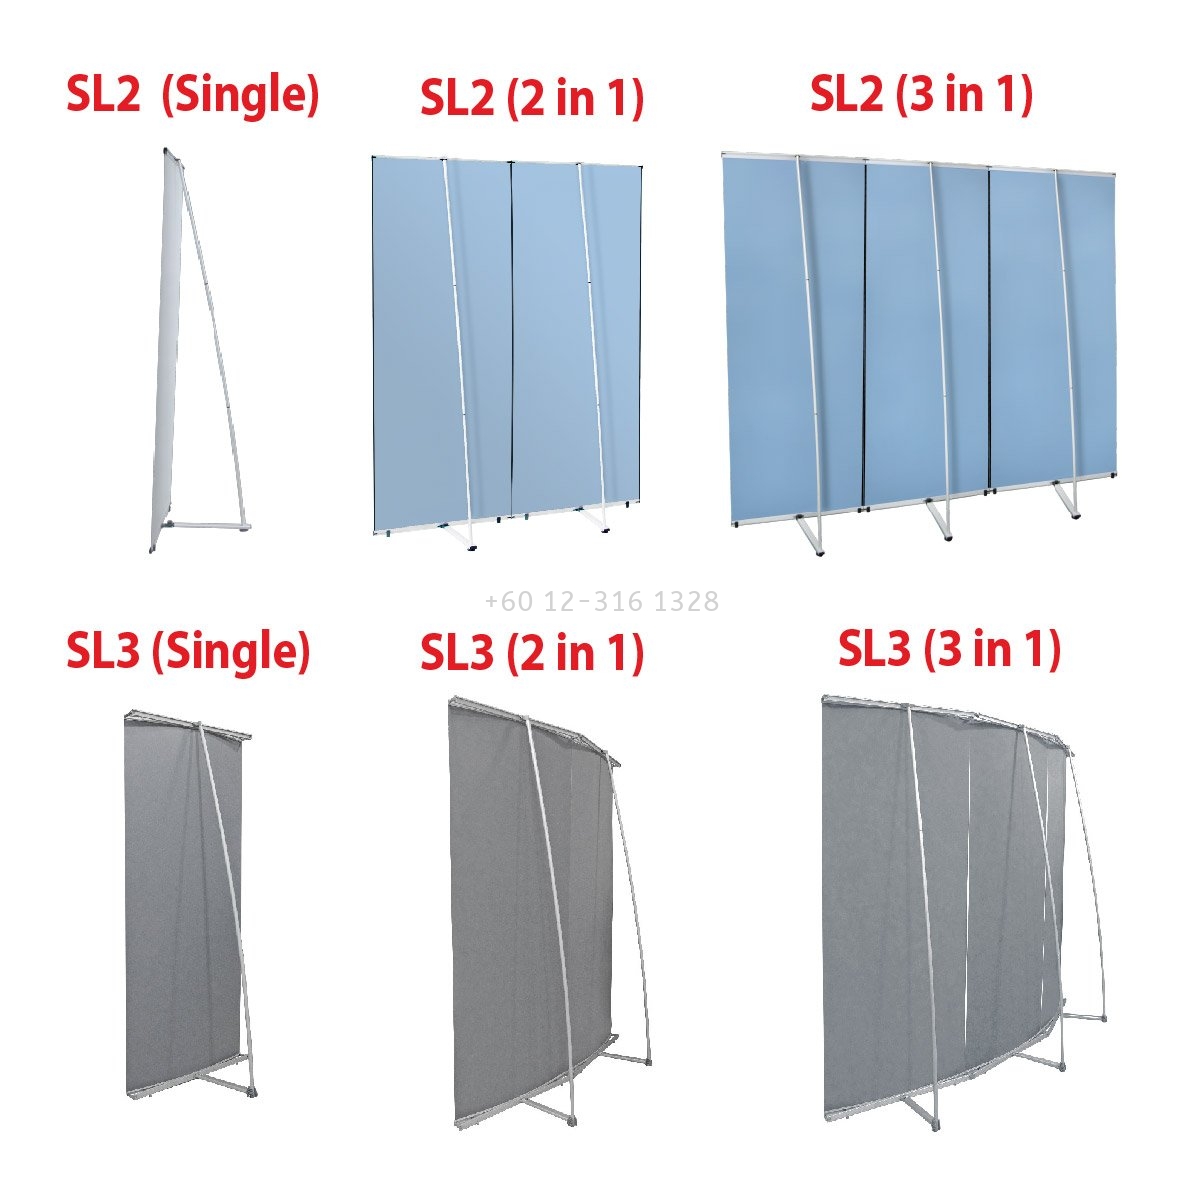 L Stand bunting series